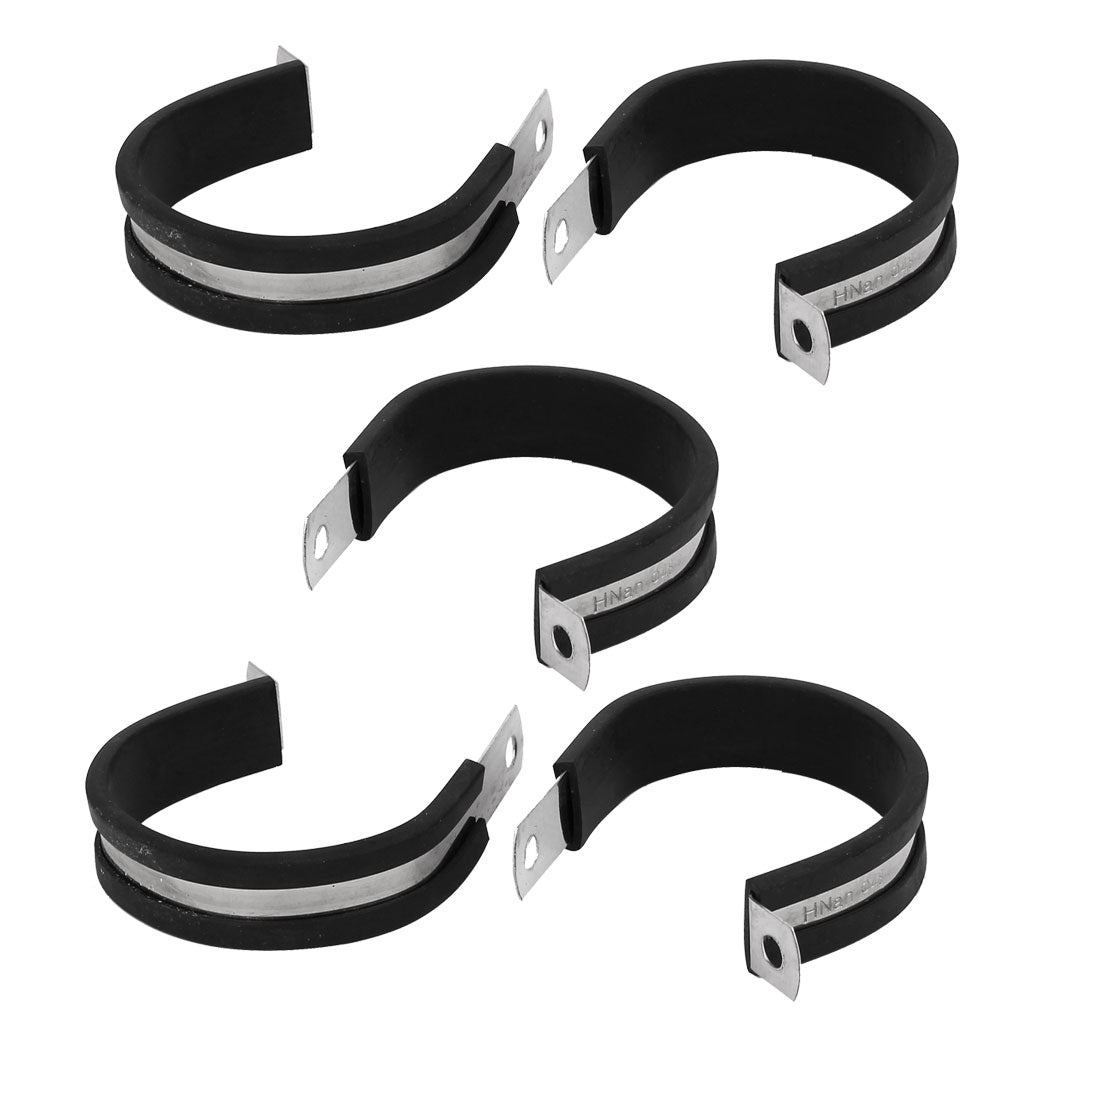 uxcell Uxcell 48mm Dia EPDM Rubber Lined P Clips Cable Hose Pipe Clamps Holder 5pcs